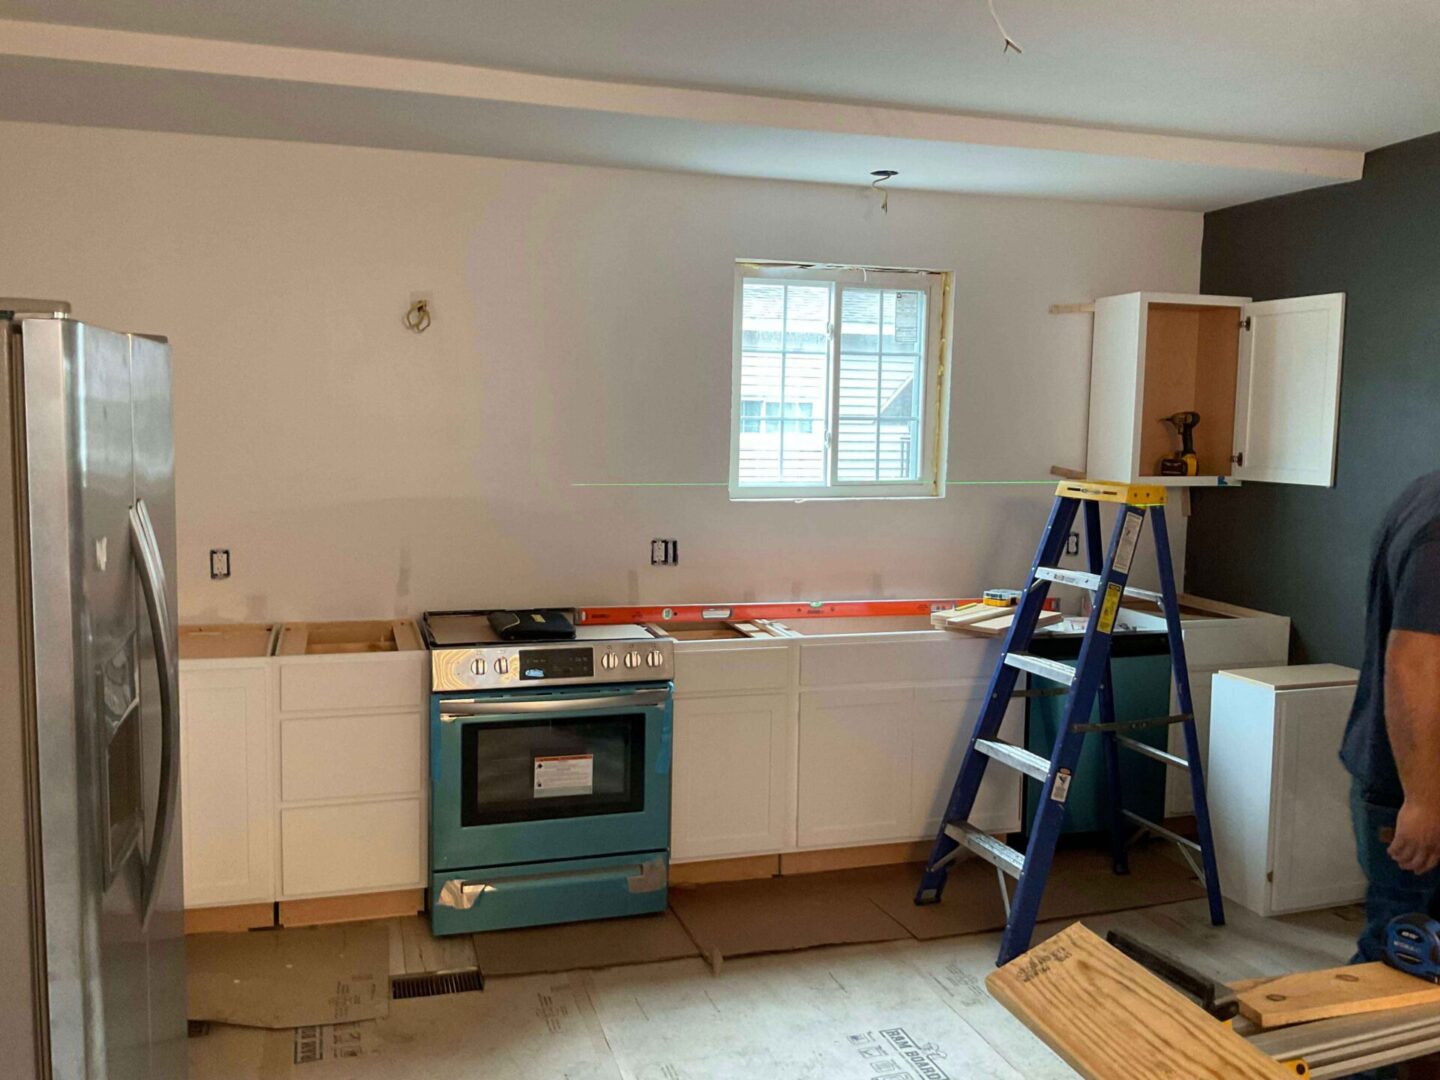 A kitchen being remodeled with the help of a ladder.